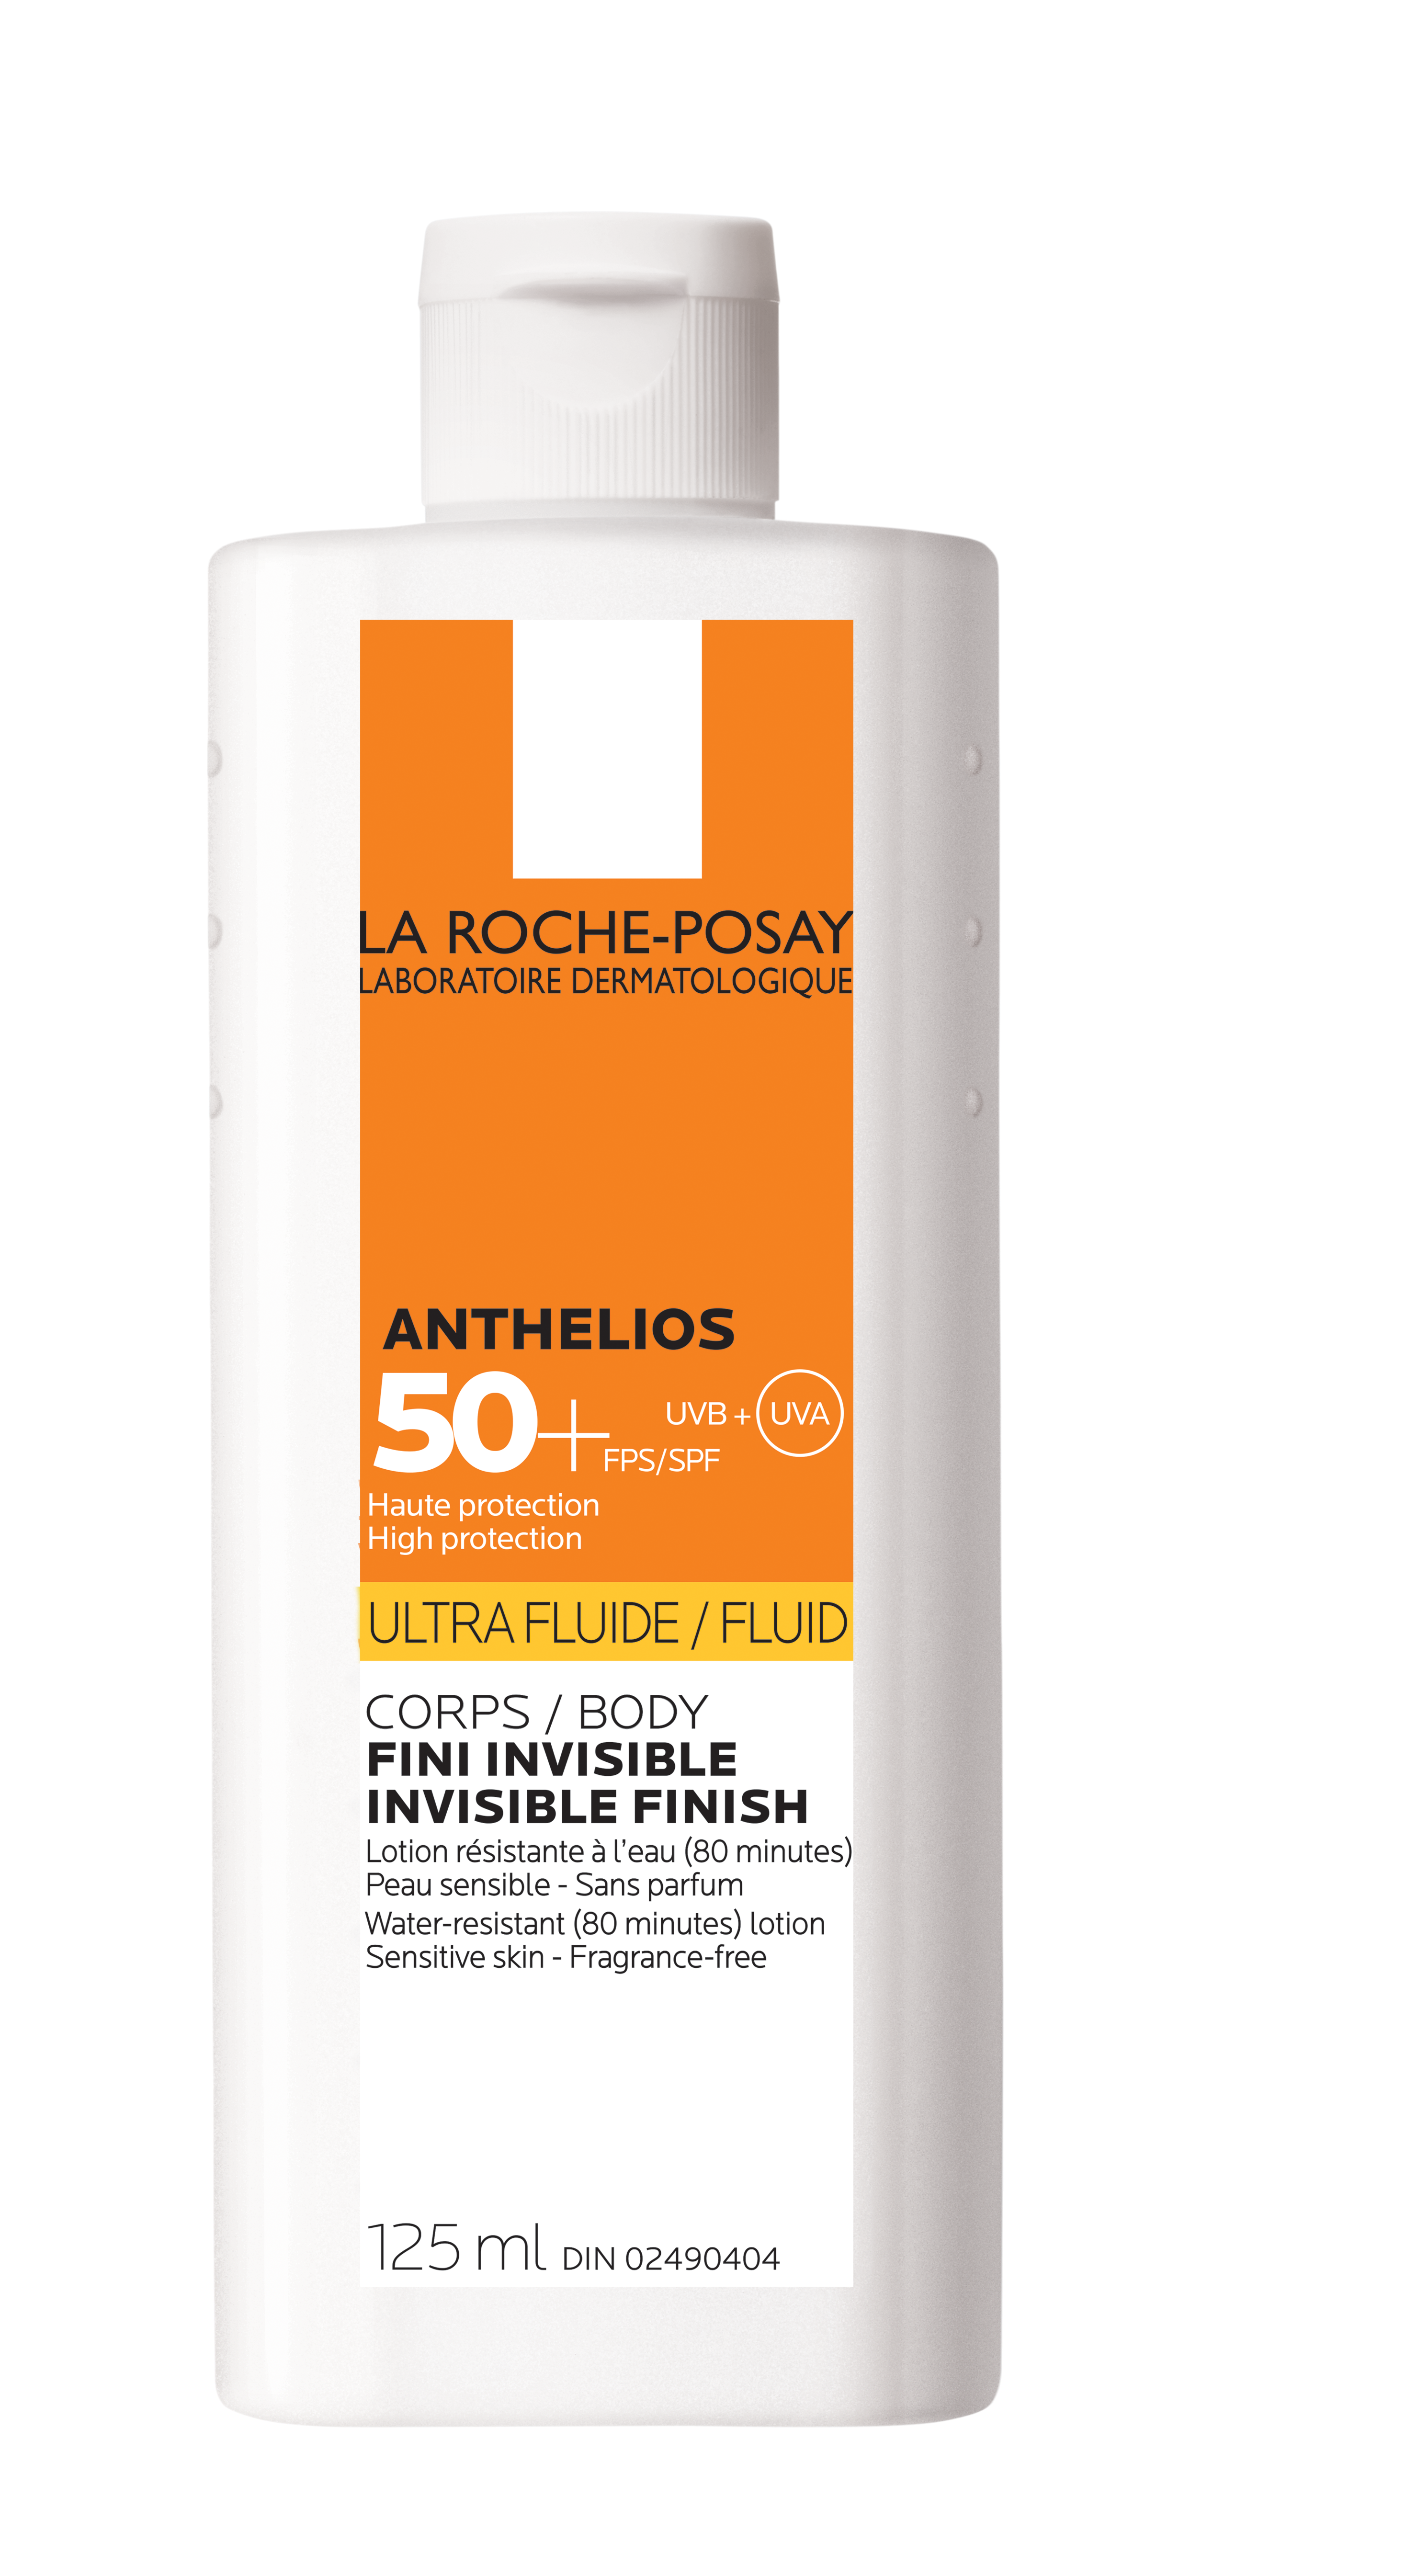 La Roche-Posay + Anthelios Mineral Lotion SPF 50